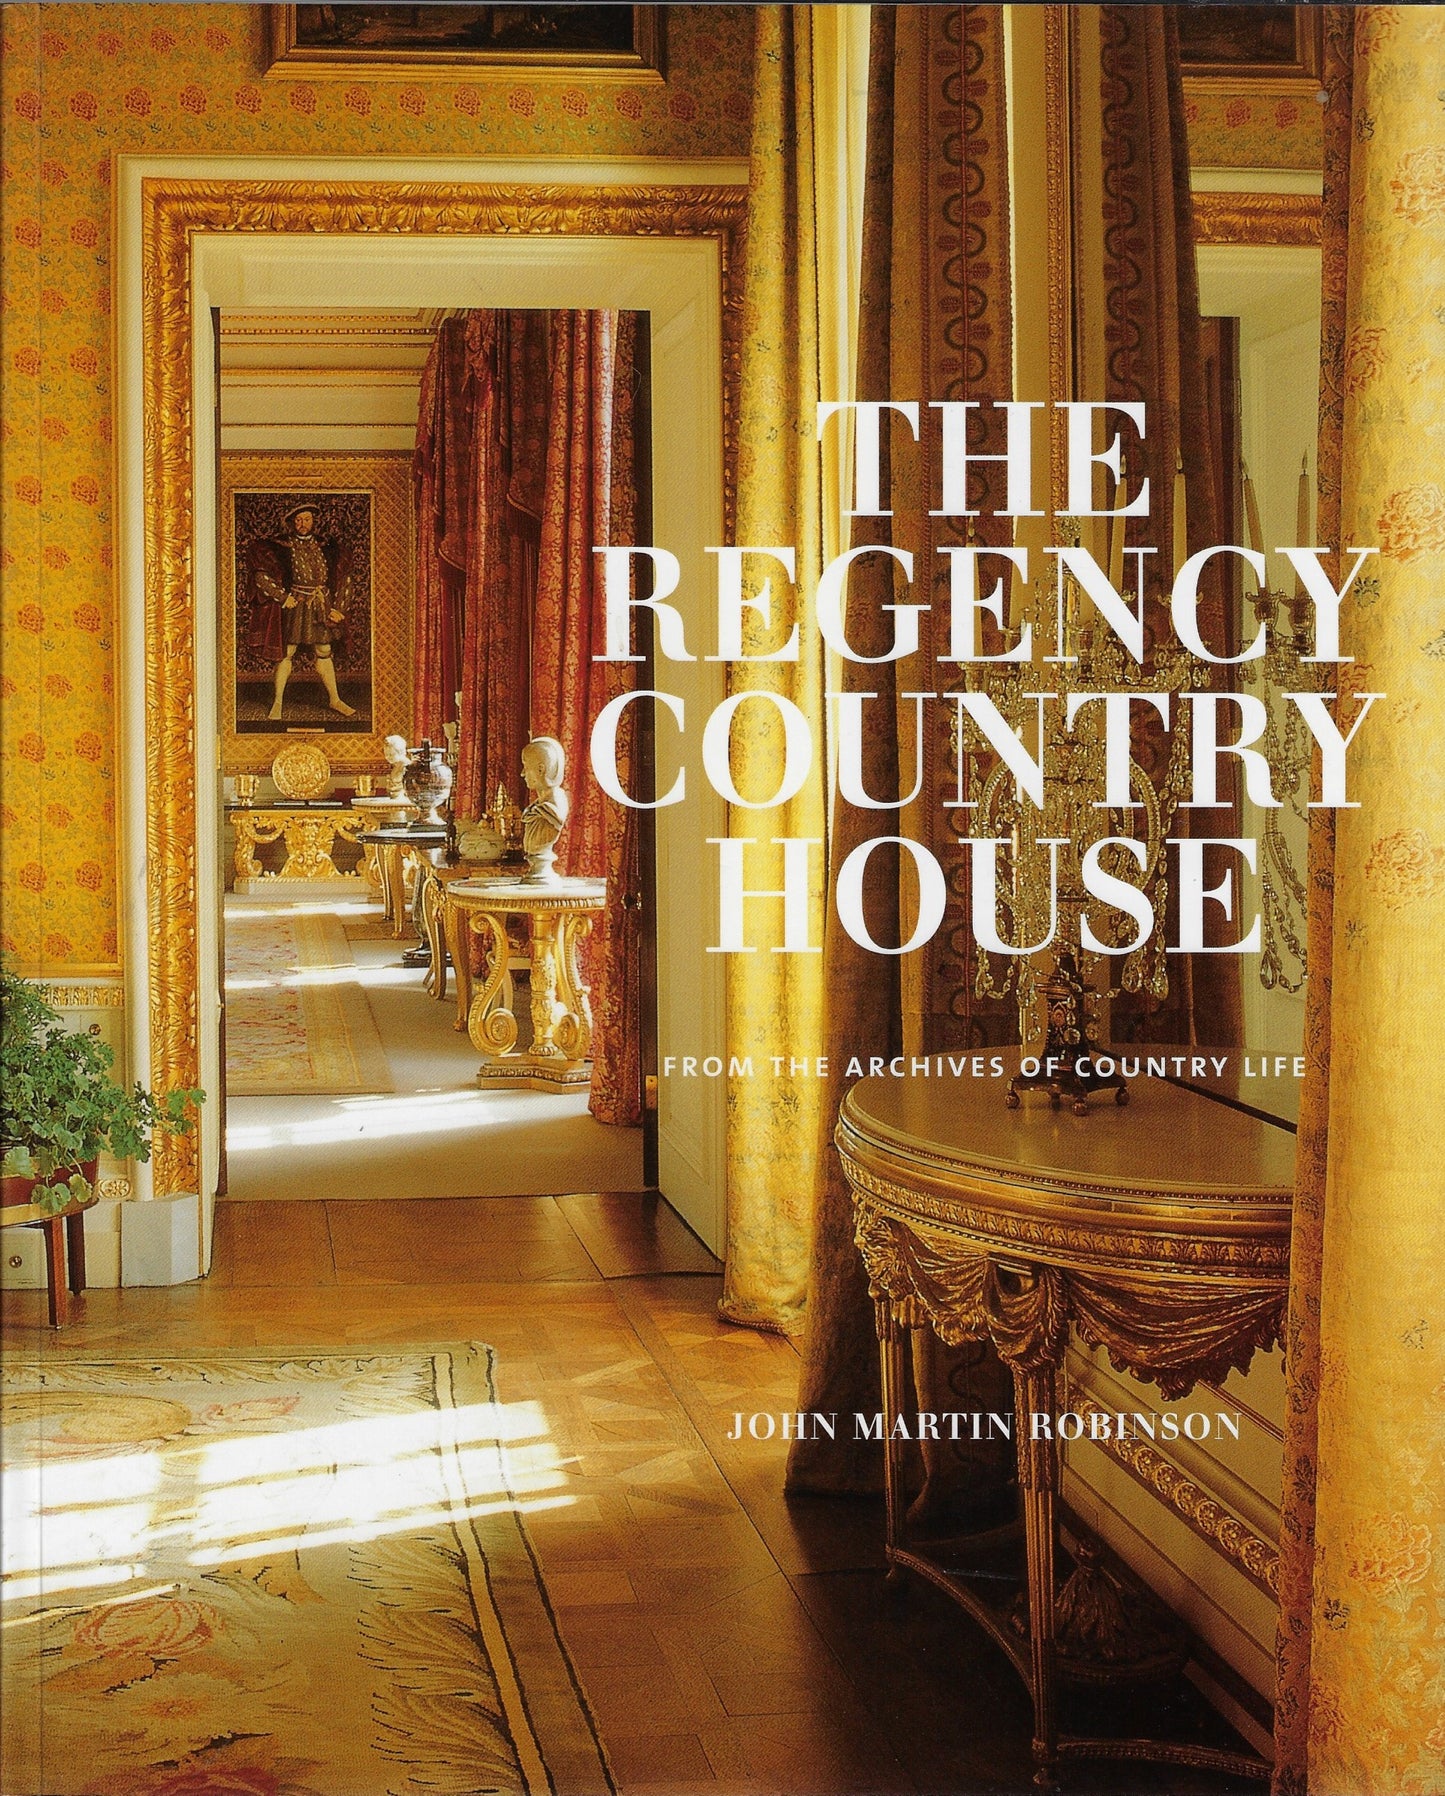 Regency Country House / From the Archives of Country Life